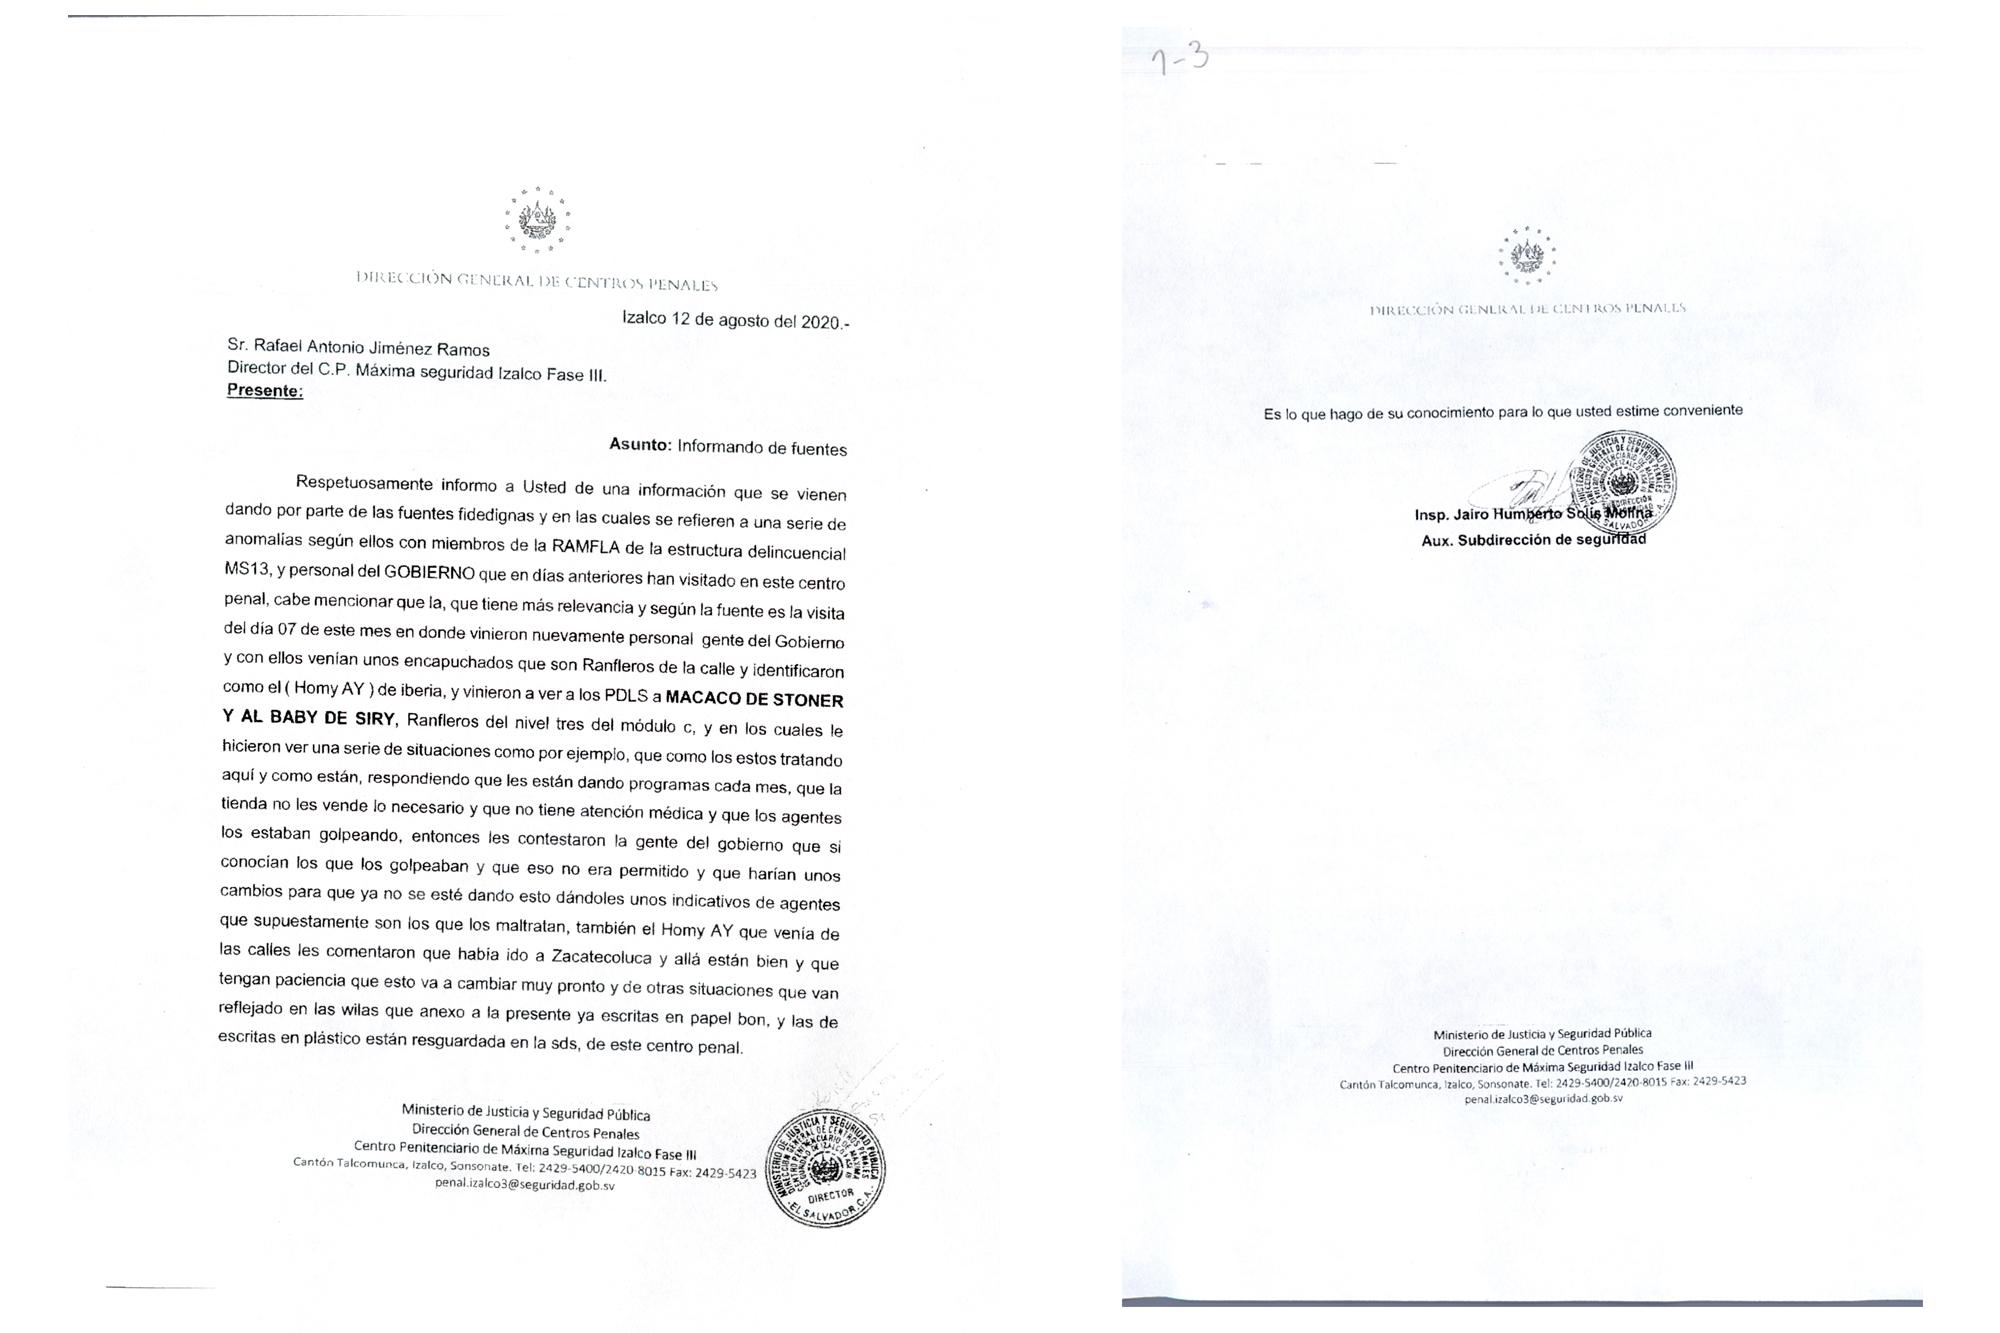 Inspector Jairo Humberto Solís Molina’s report to the warden of Izalco’s maximum-security wing (“Phase III”), dated August 12, 2020. That same day, Solís Molina reported a series of “abnormalities” between members of MS-13 senior leadership (“la ranfla”) and “administration officials,” and noted that officials “returned” on August 7 with “masked ranfleros from the street.” He identified one ranflero, or MS-13 leader, as “Ay” of the Iberias clique, and noted that the group met with Macaco of Stoner and Baby of City, both of whom are incarcerated in Izalco. The report confirms that Ay told Macaco and Baby that he had visited Zacatecoluca and asked them to be patient because “things will change very soon.”